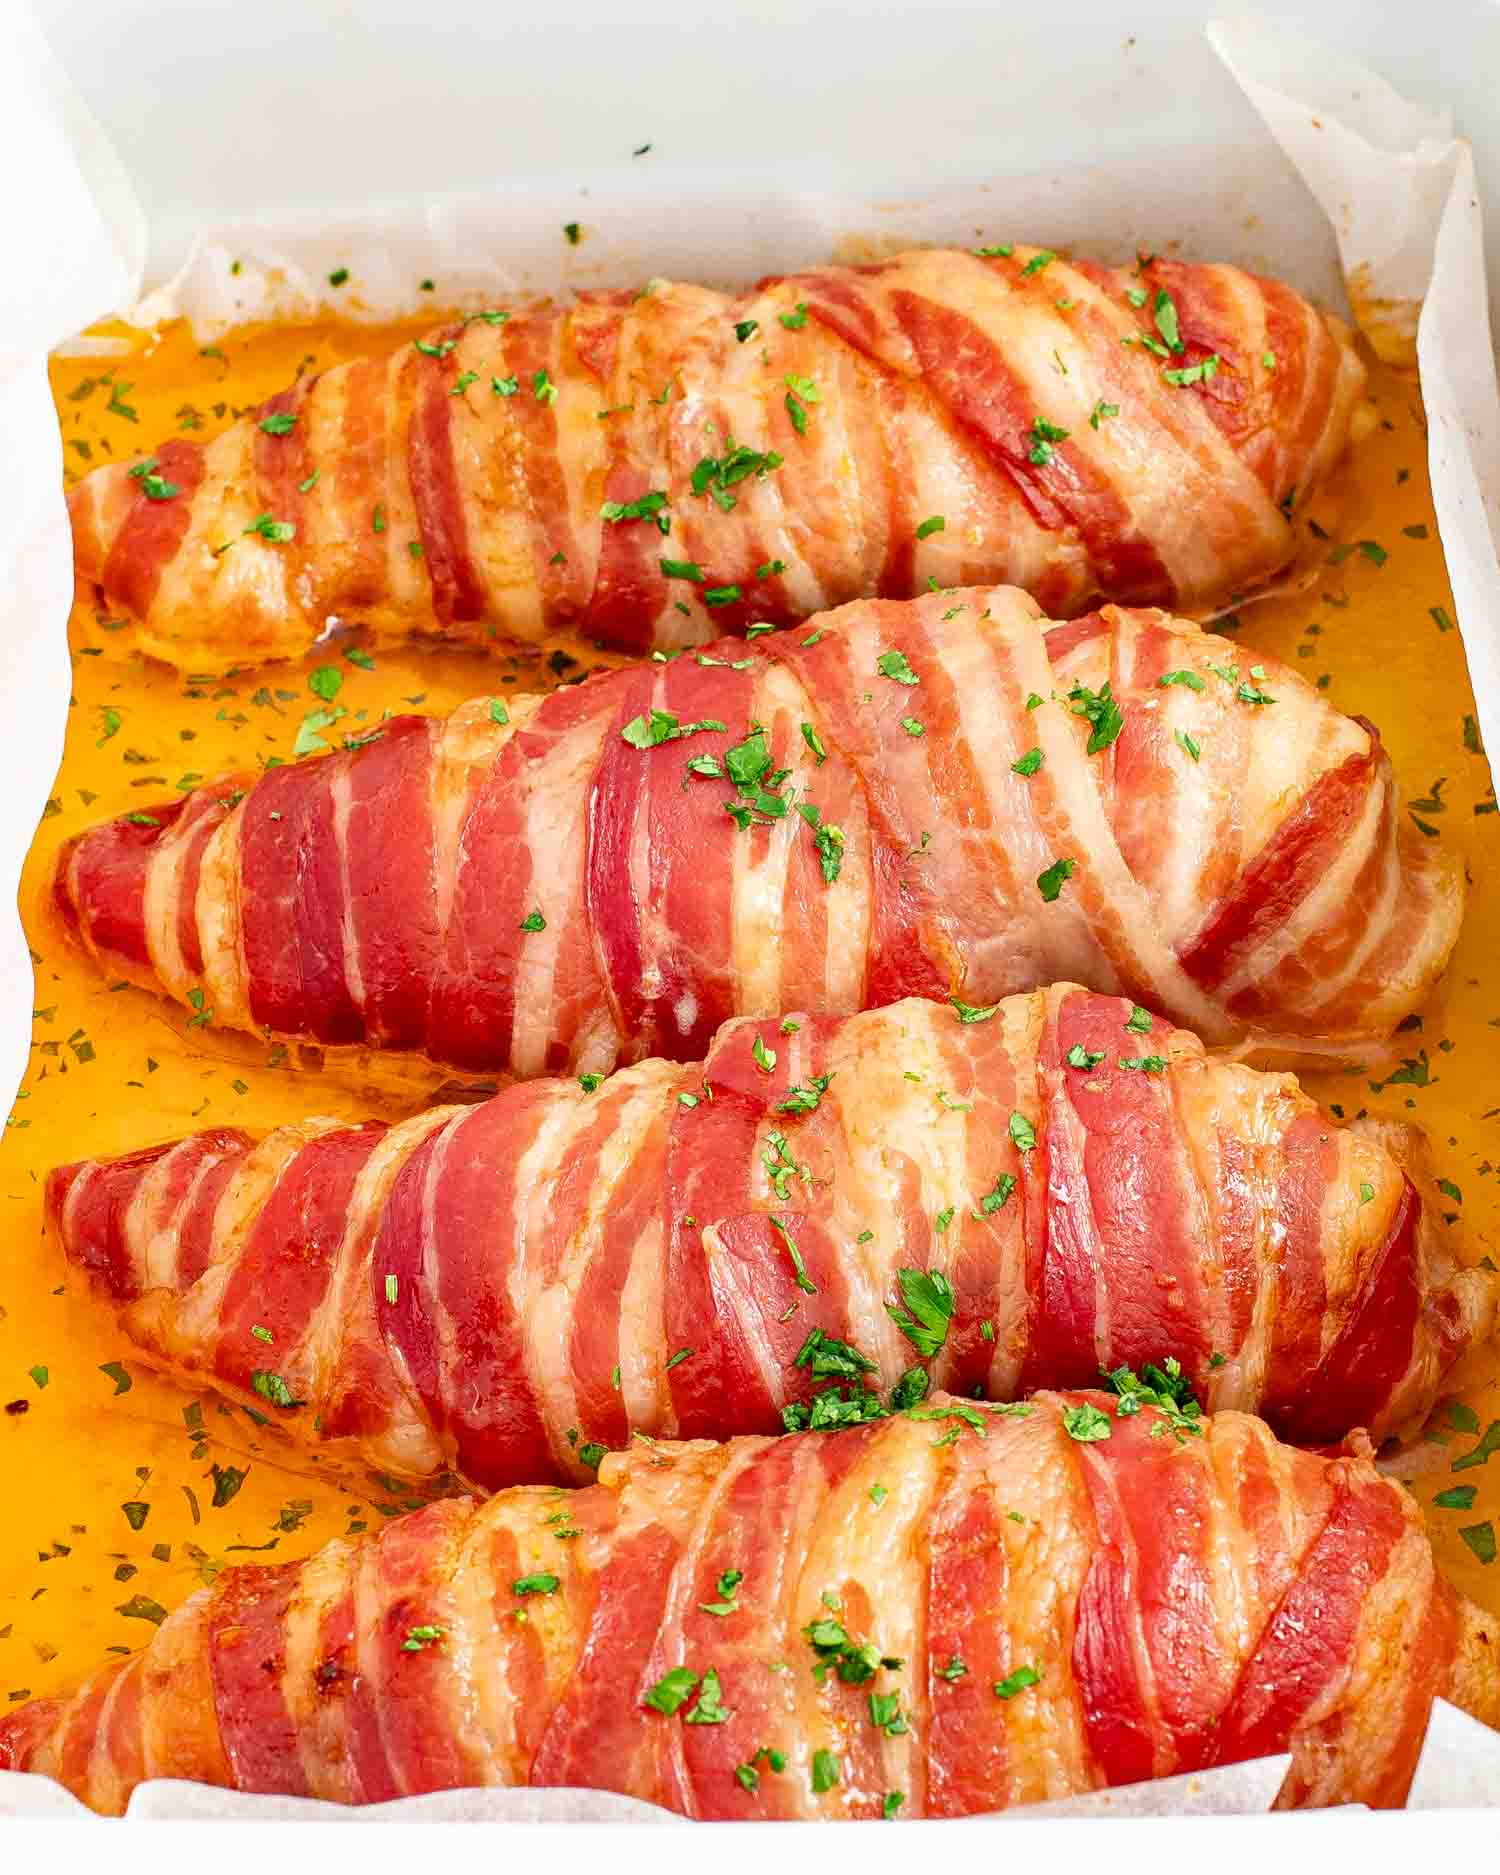 fresh out of the oven bacon wrapped chicken breast.